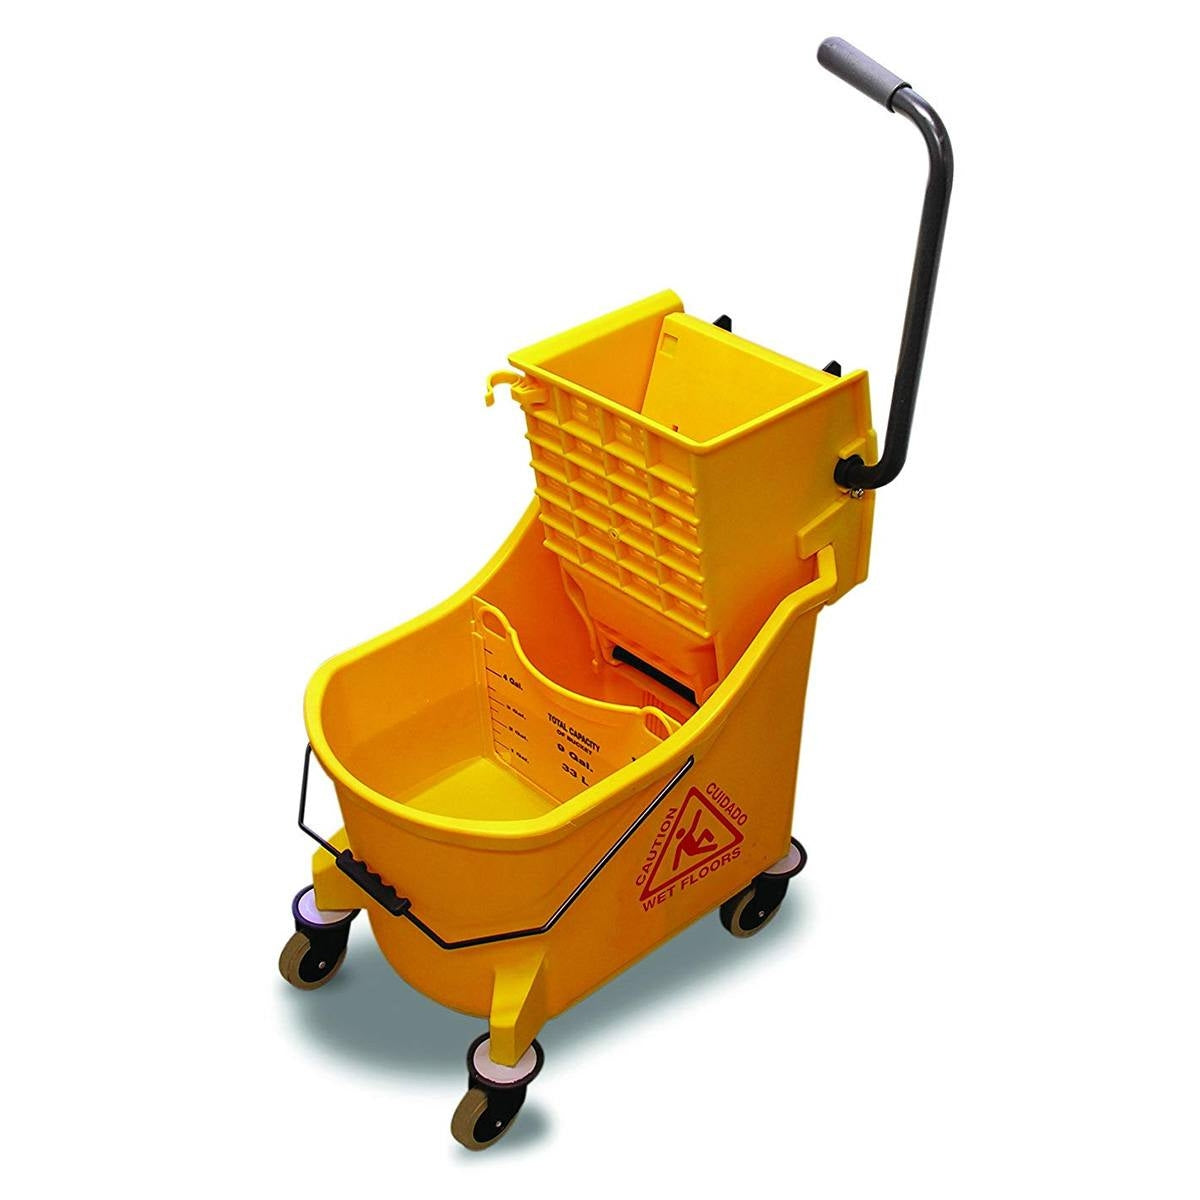 Benefits of Using Mop Bucket for Cleaning